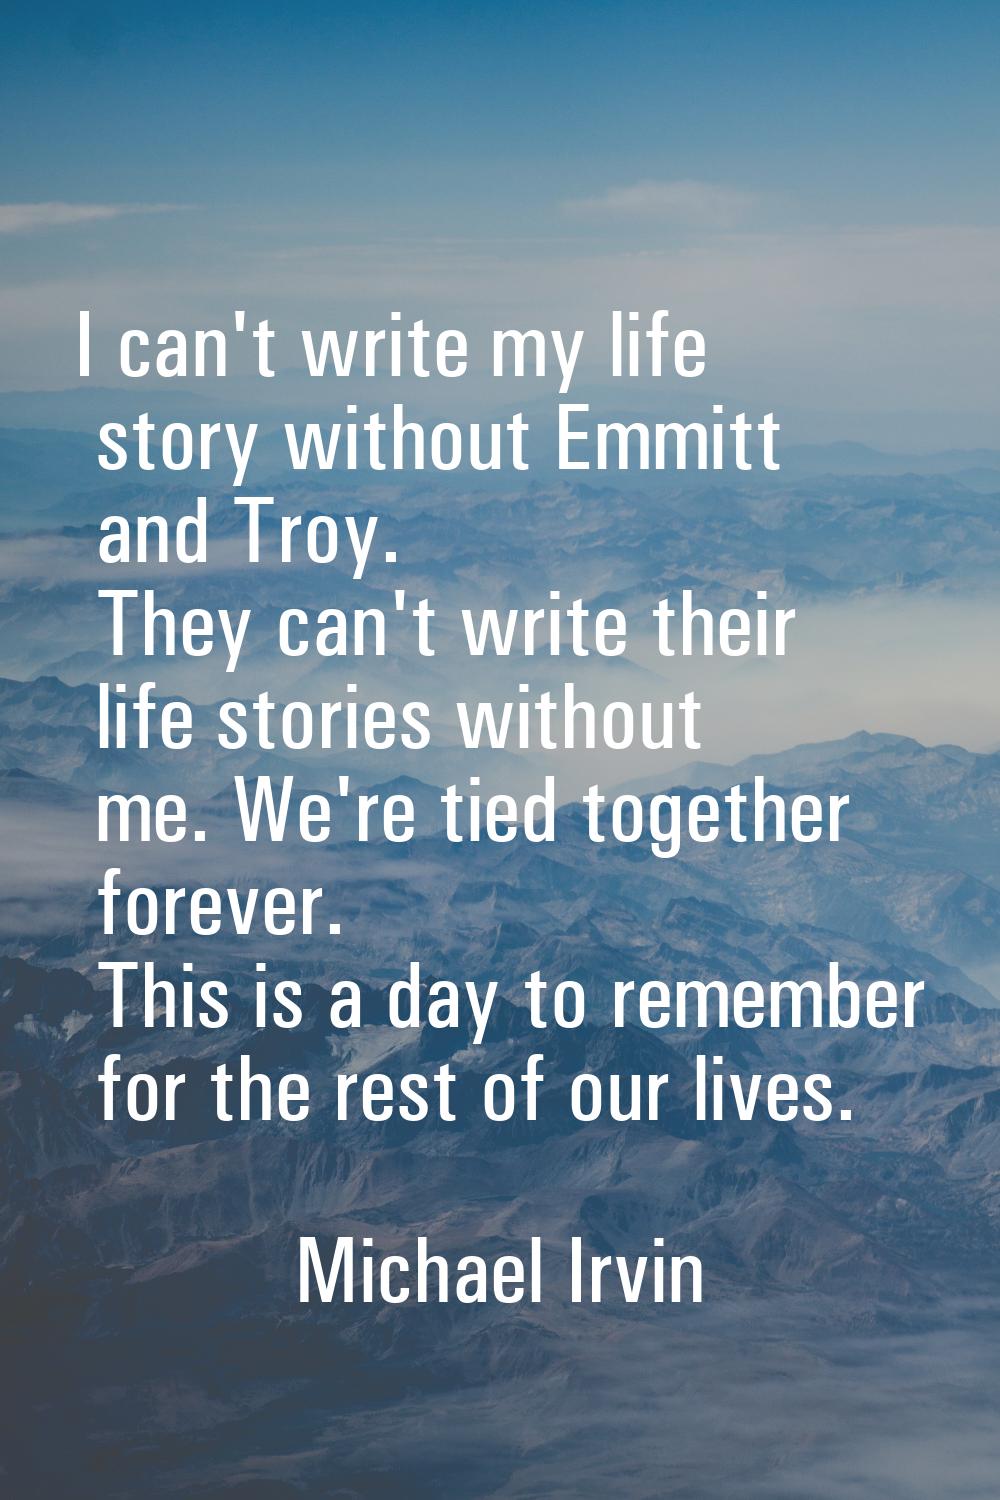 I can't write my life story without Emmitt and Troy. They can't write their life stories without me